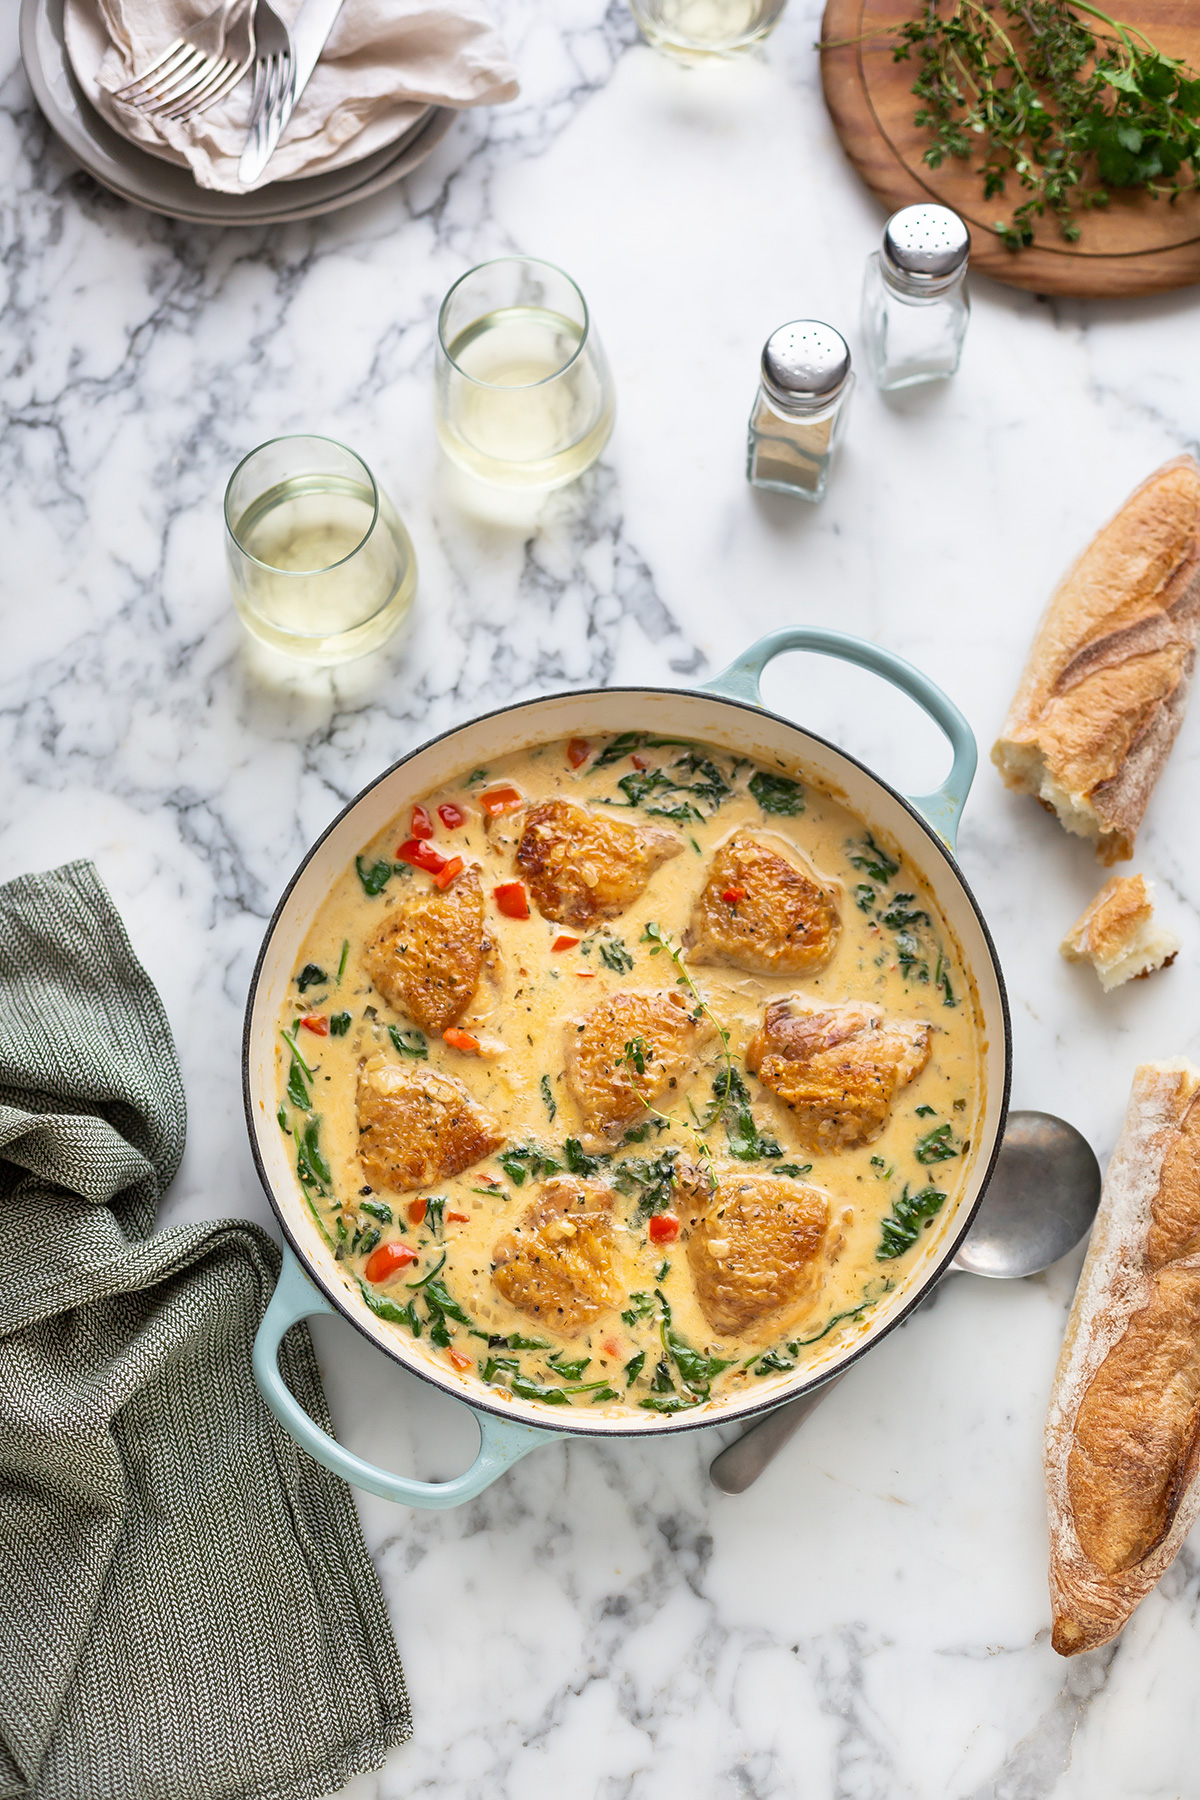 Creamy chicken with red pepper & spinach